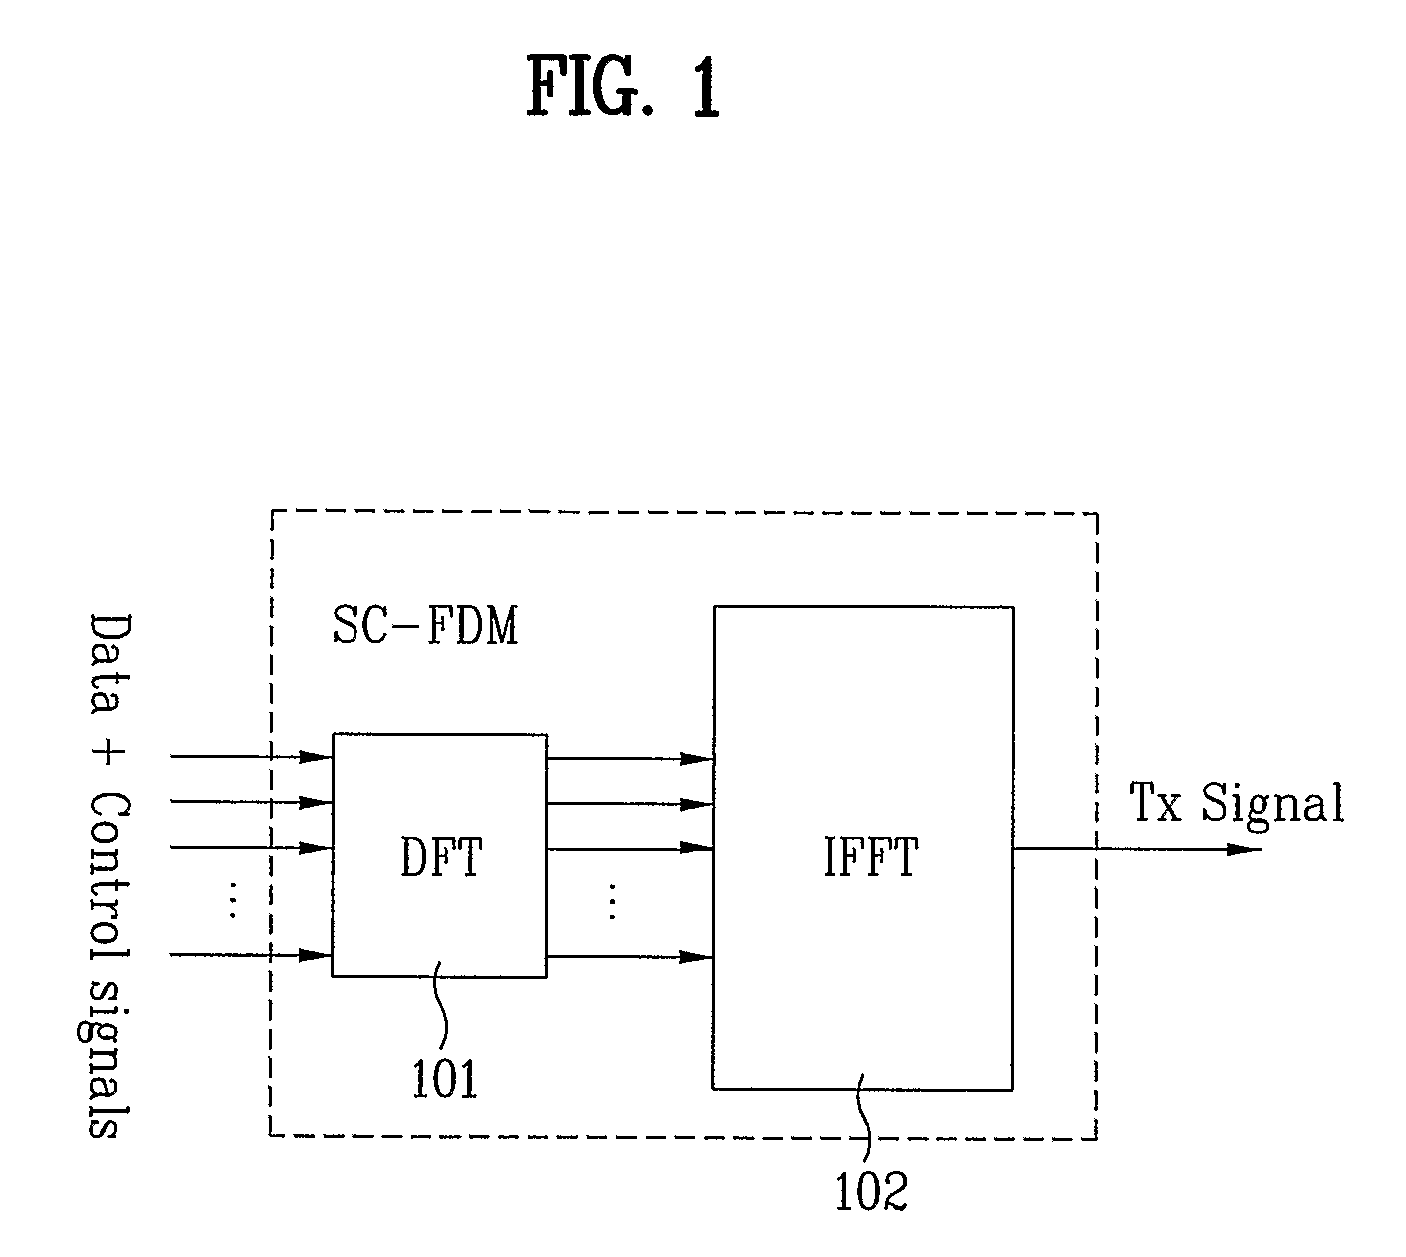 Sequence generation and transmission method based on time and frequency domain transmission unit